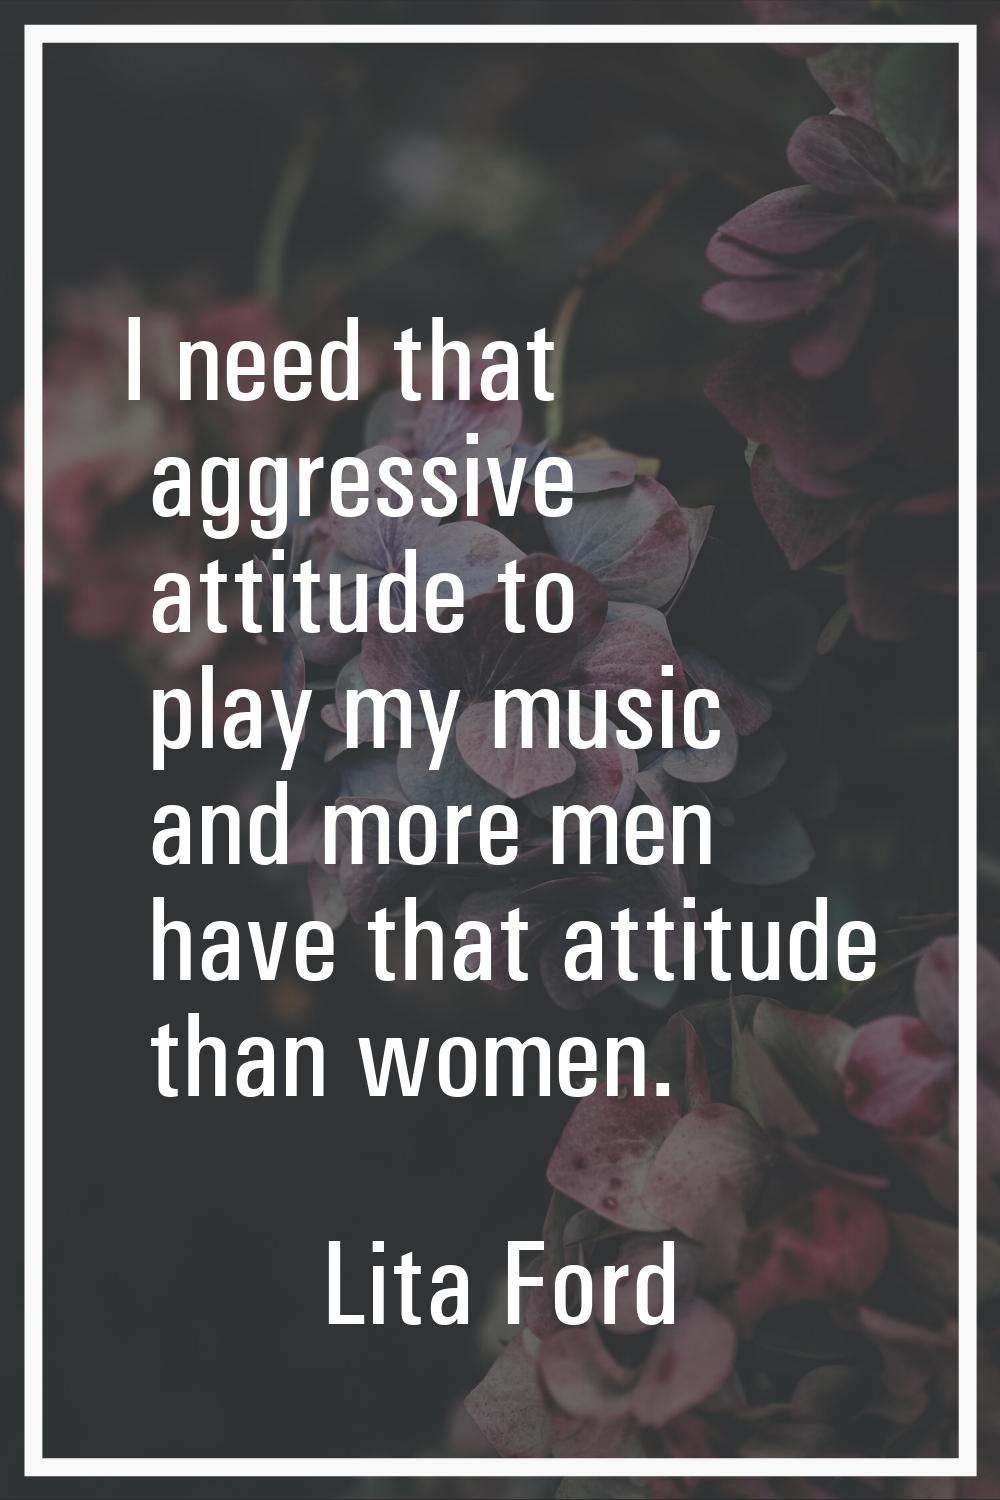 I need that aggressive attitude to play my music and more men have that attitude than women.